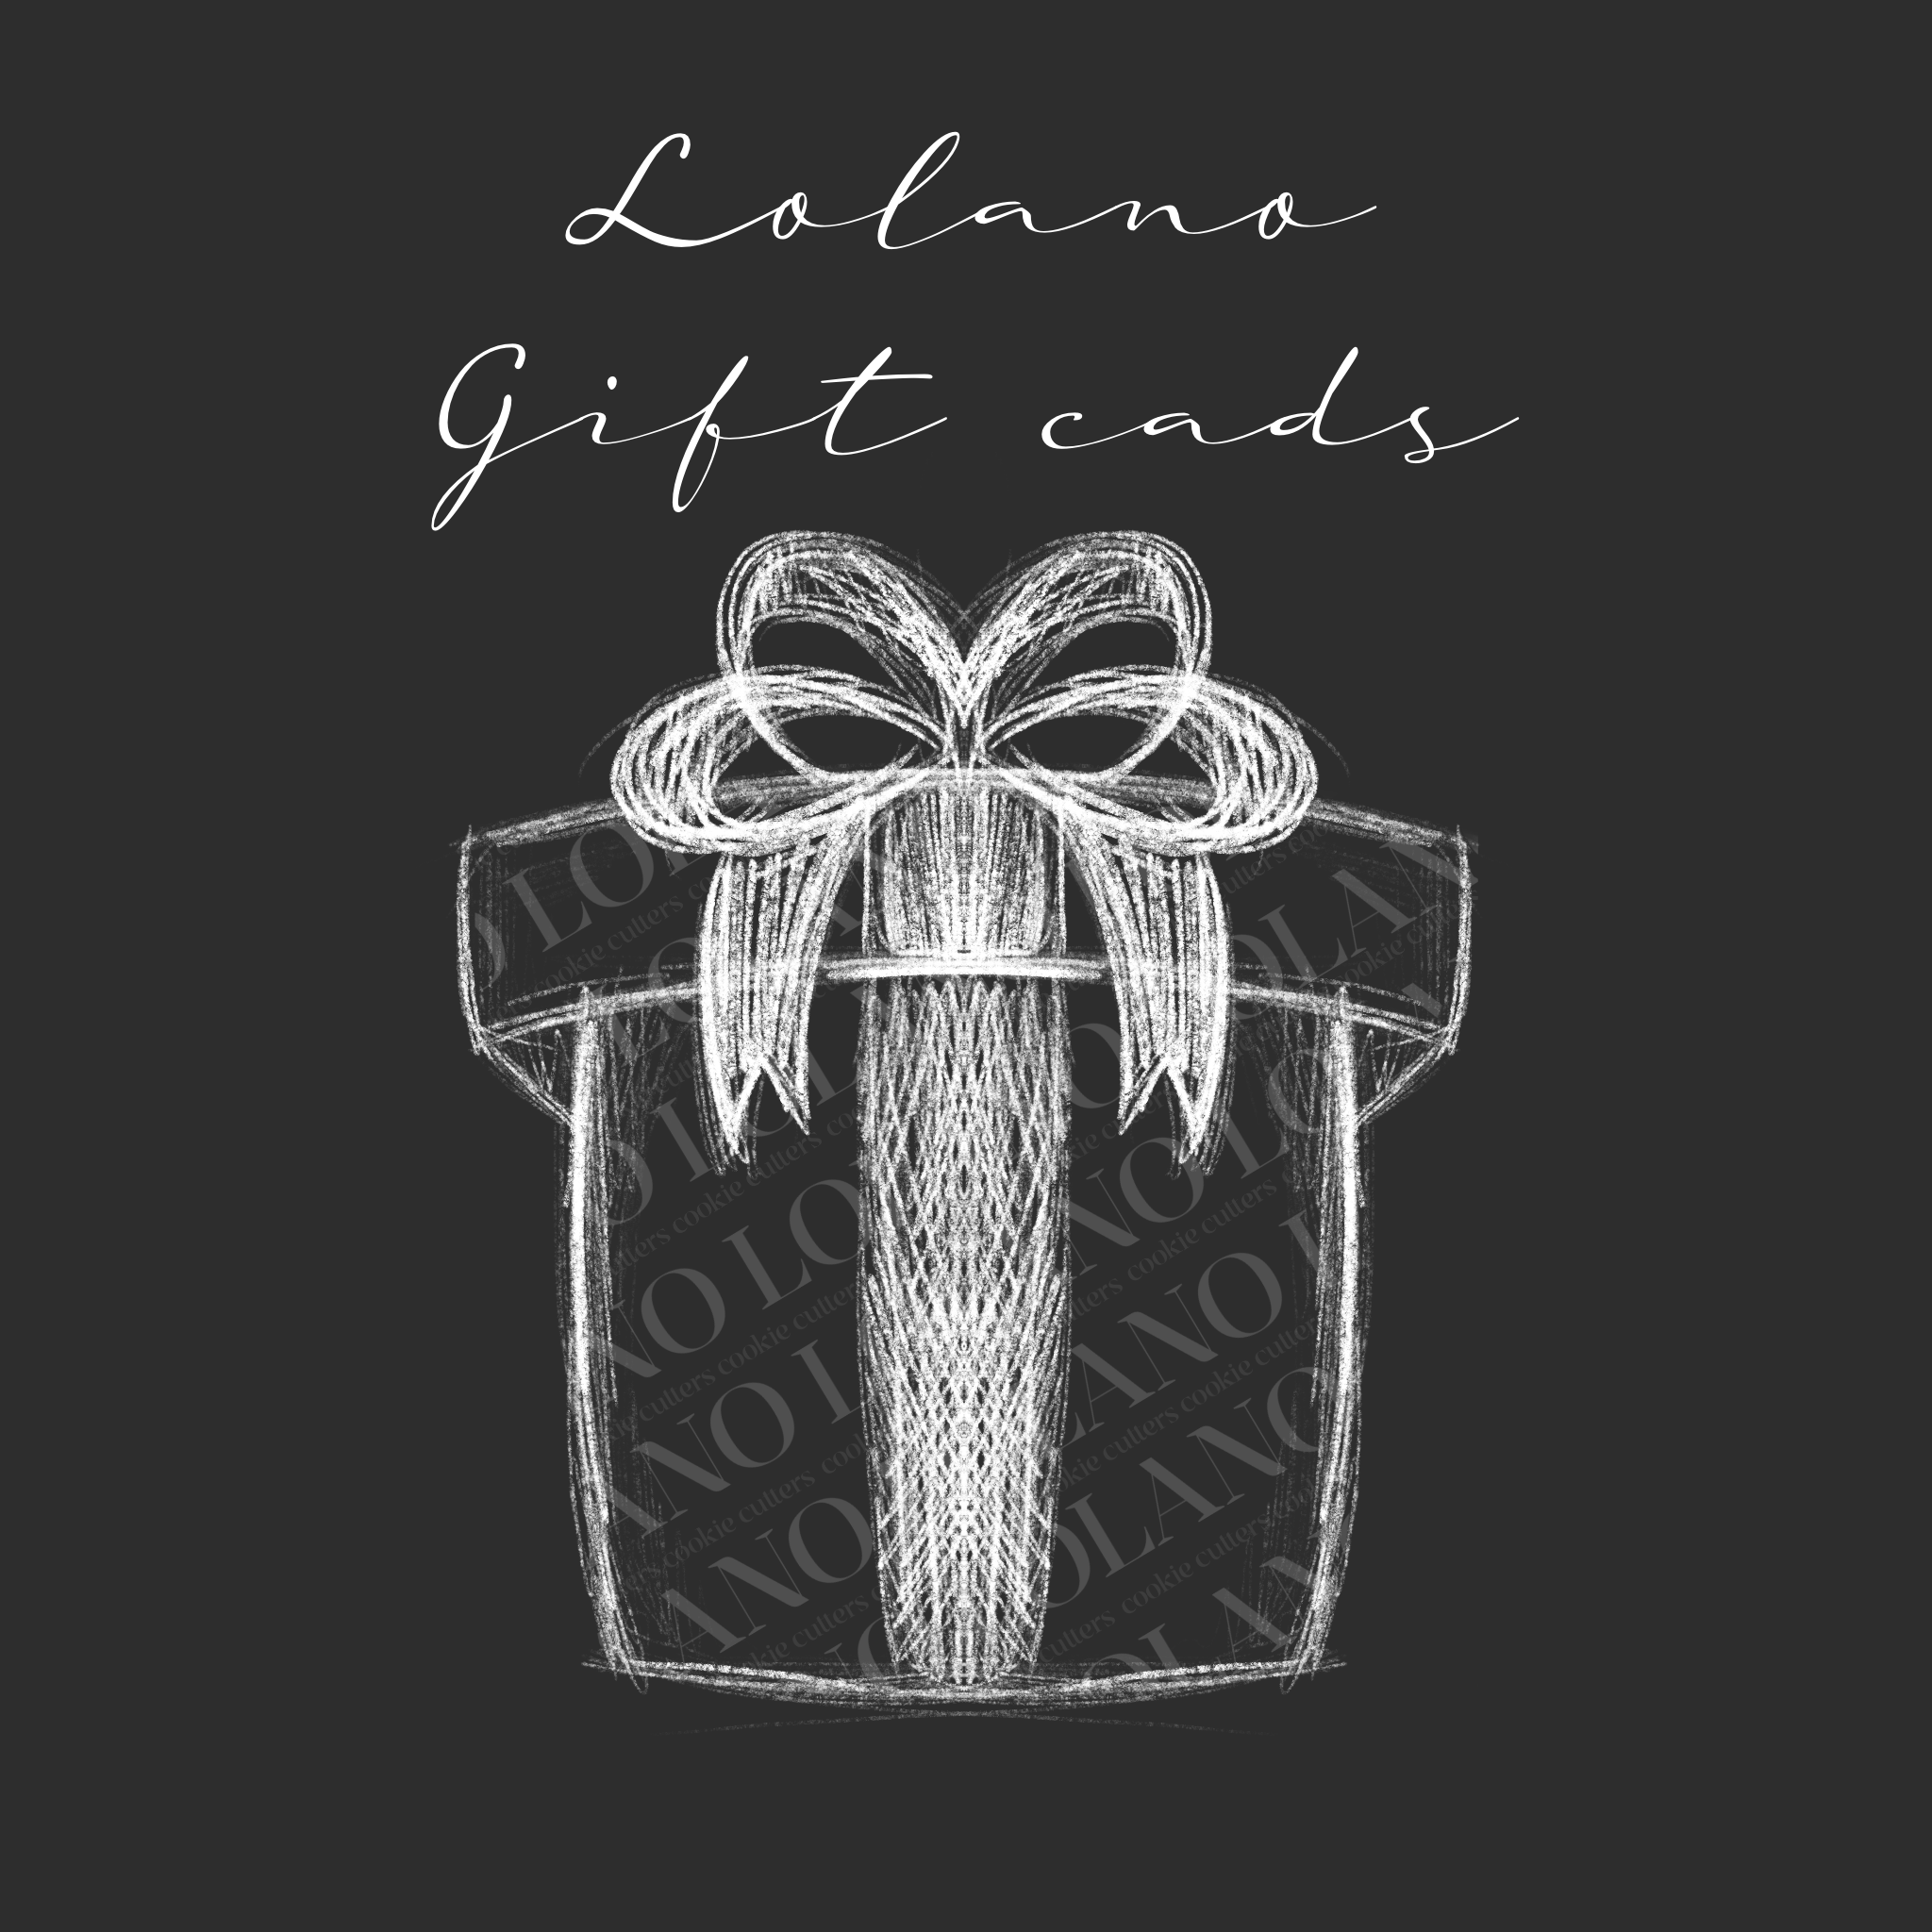 Lolano Cookie Cutter Gift Card